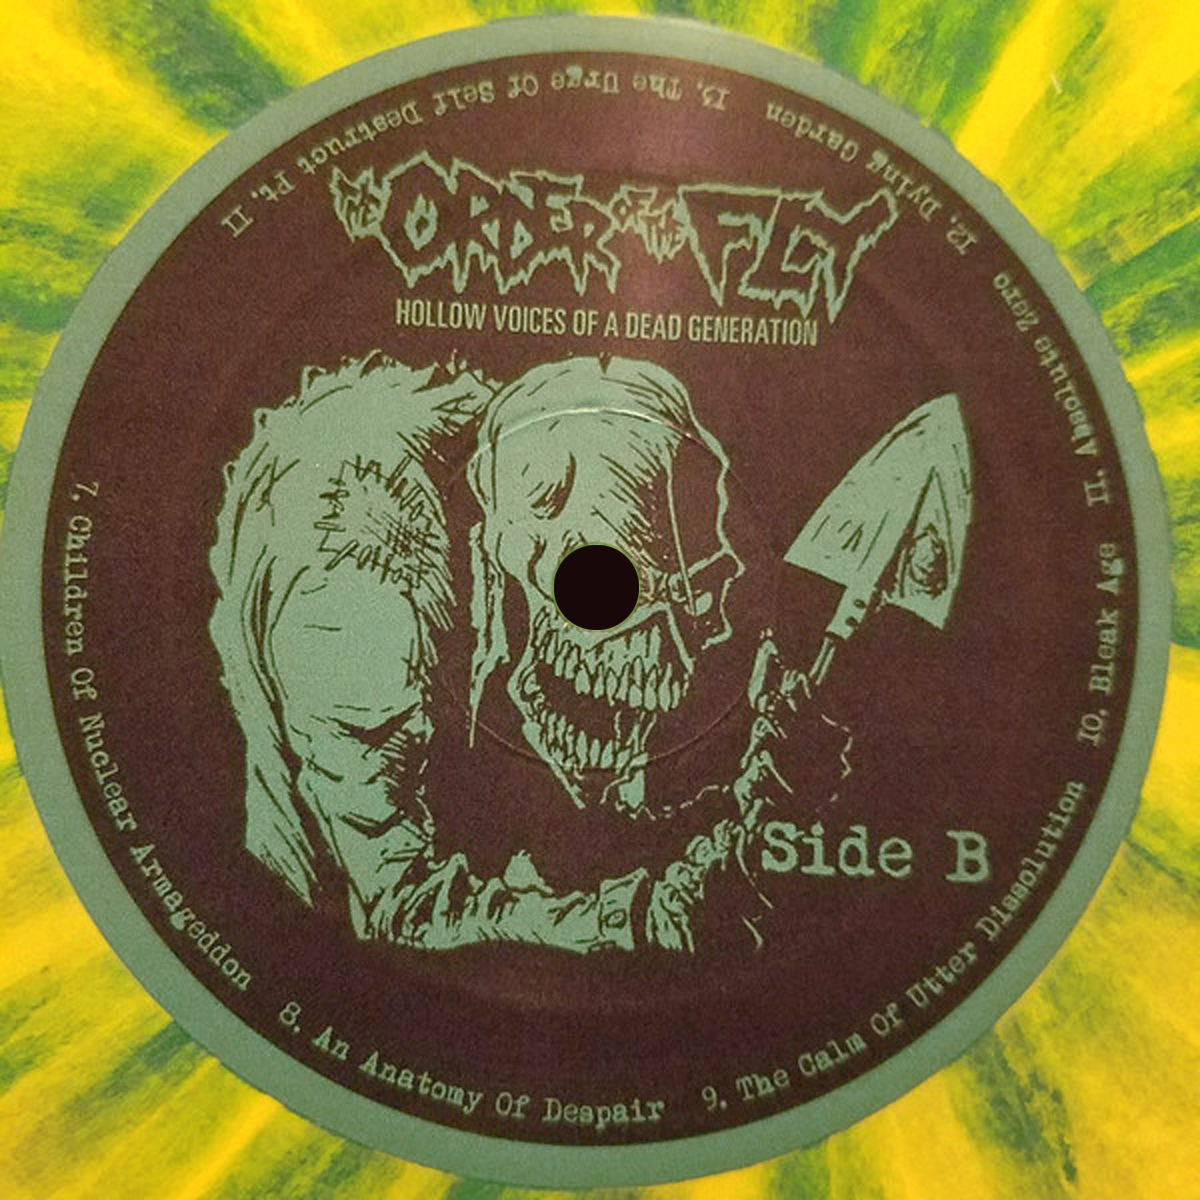 Order Of The Fly- Hollow Voices Of A Dead Generation LP ~RARE DEAD FELLOW YELLOW WAX WITH GREEN SPLATS LTD TO 87 COPIES!